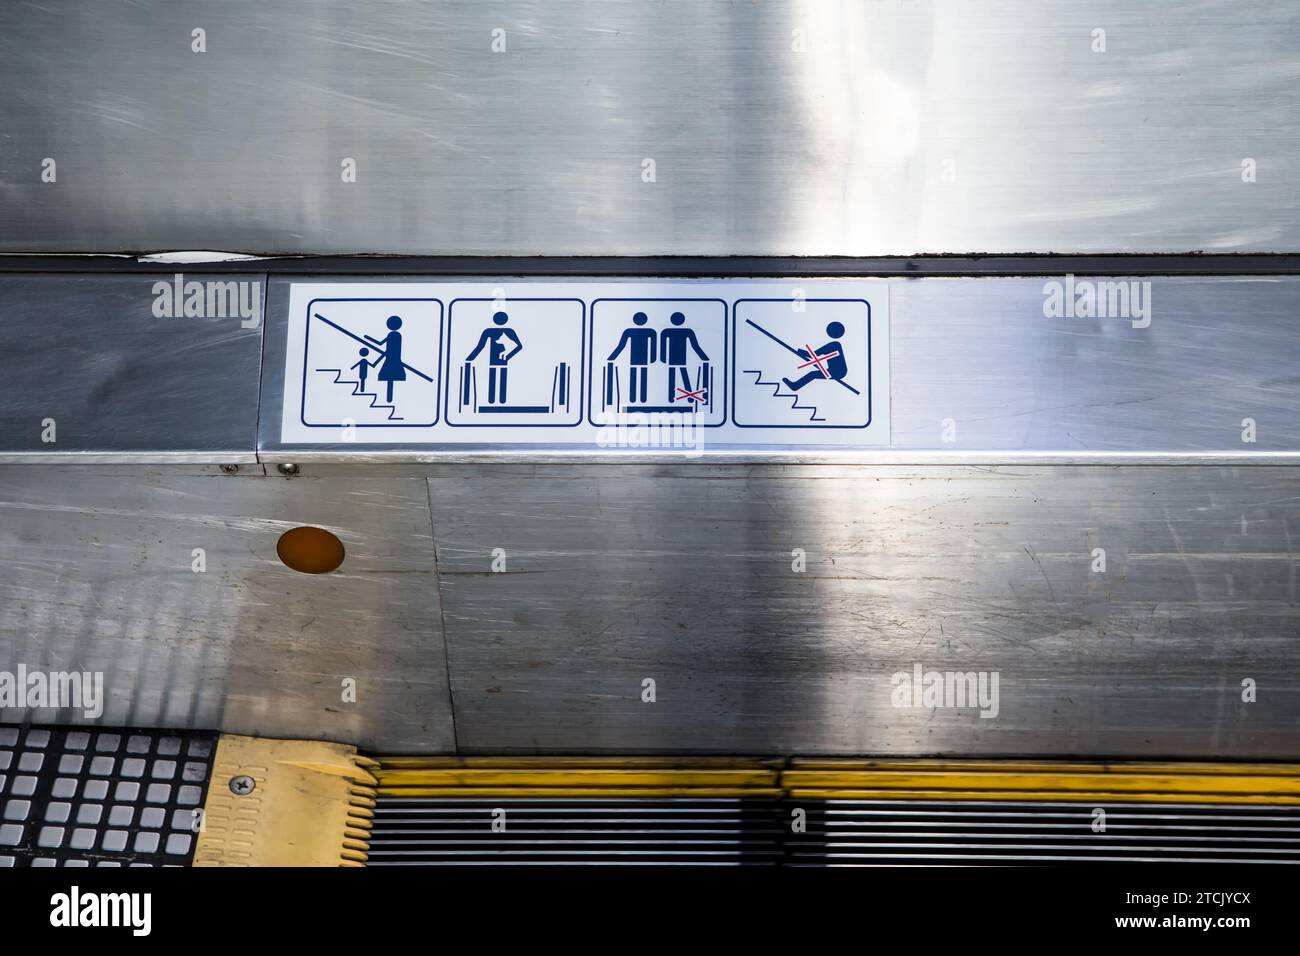 signs on an escalator, warning signs, the escalator at the mall Stock Photo